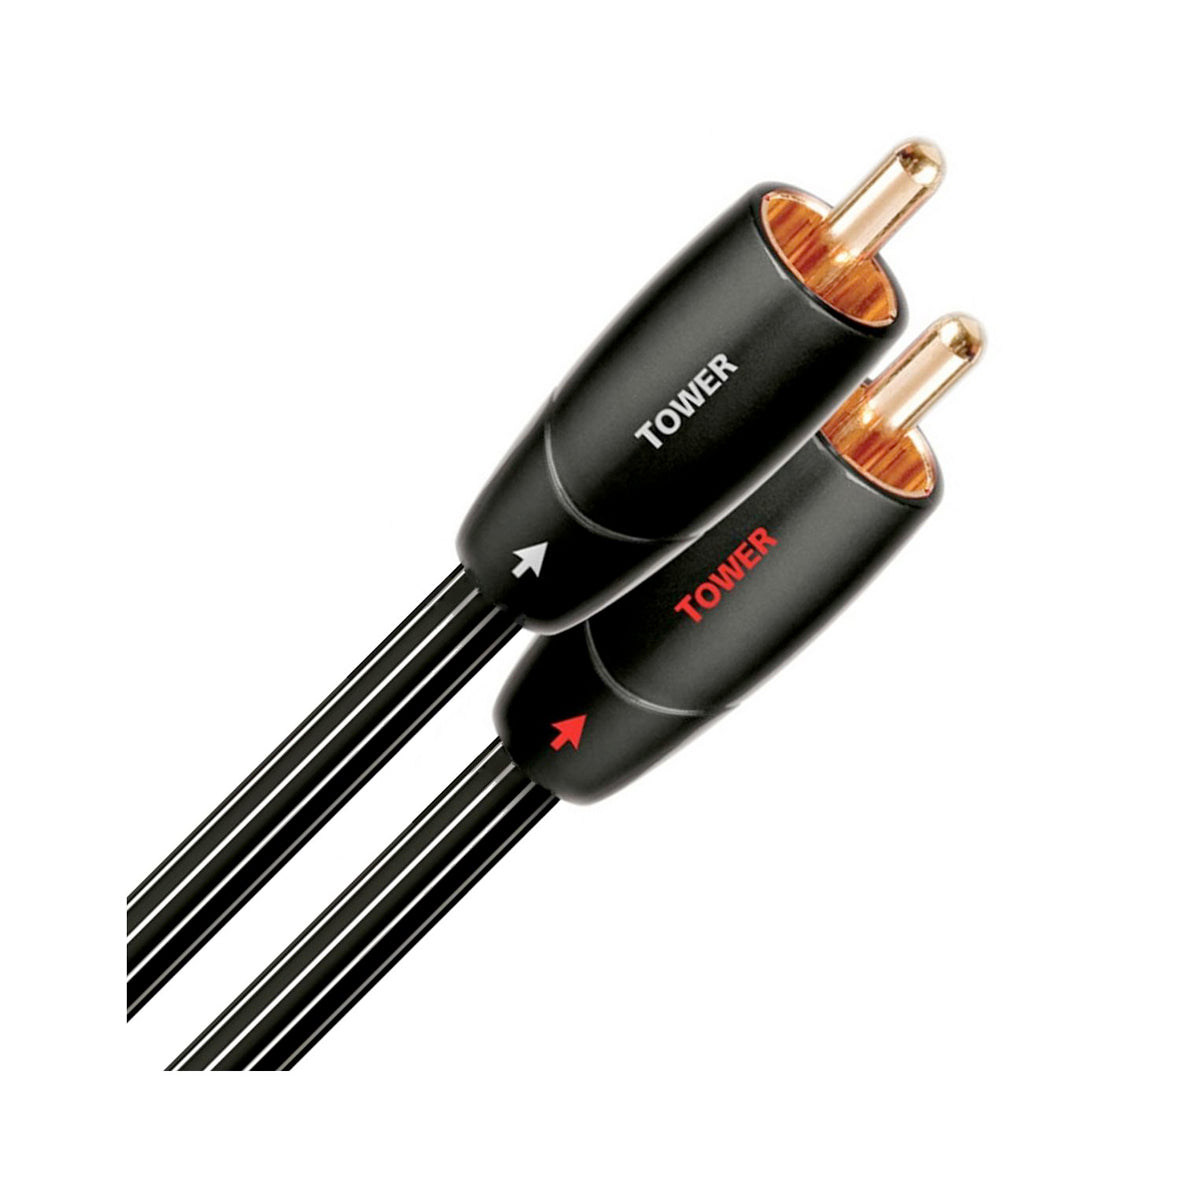 Audioquest RCA 3.5mm Interconnect Cables - TOWER